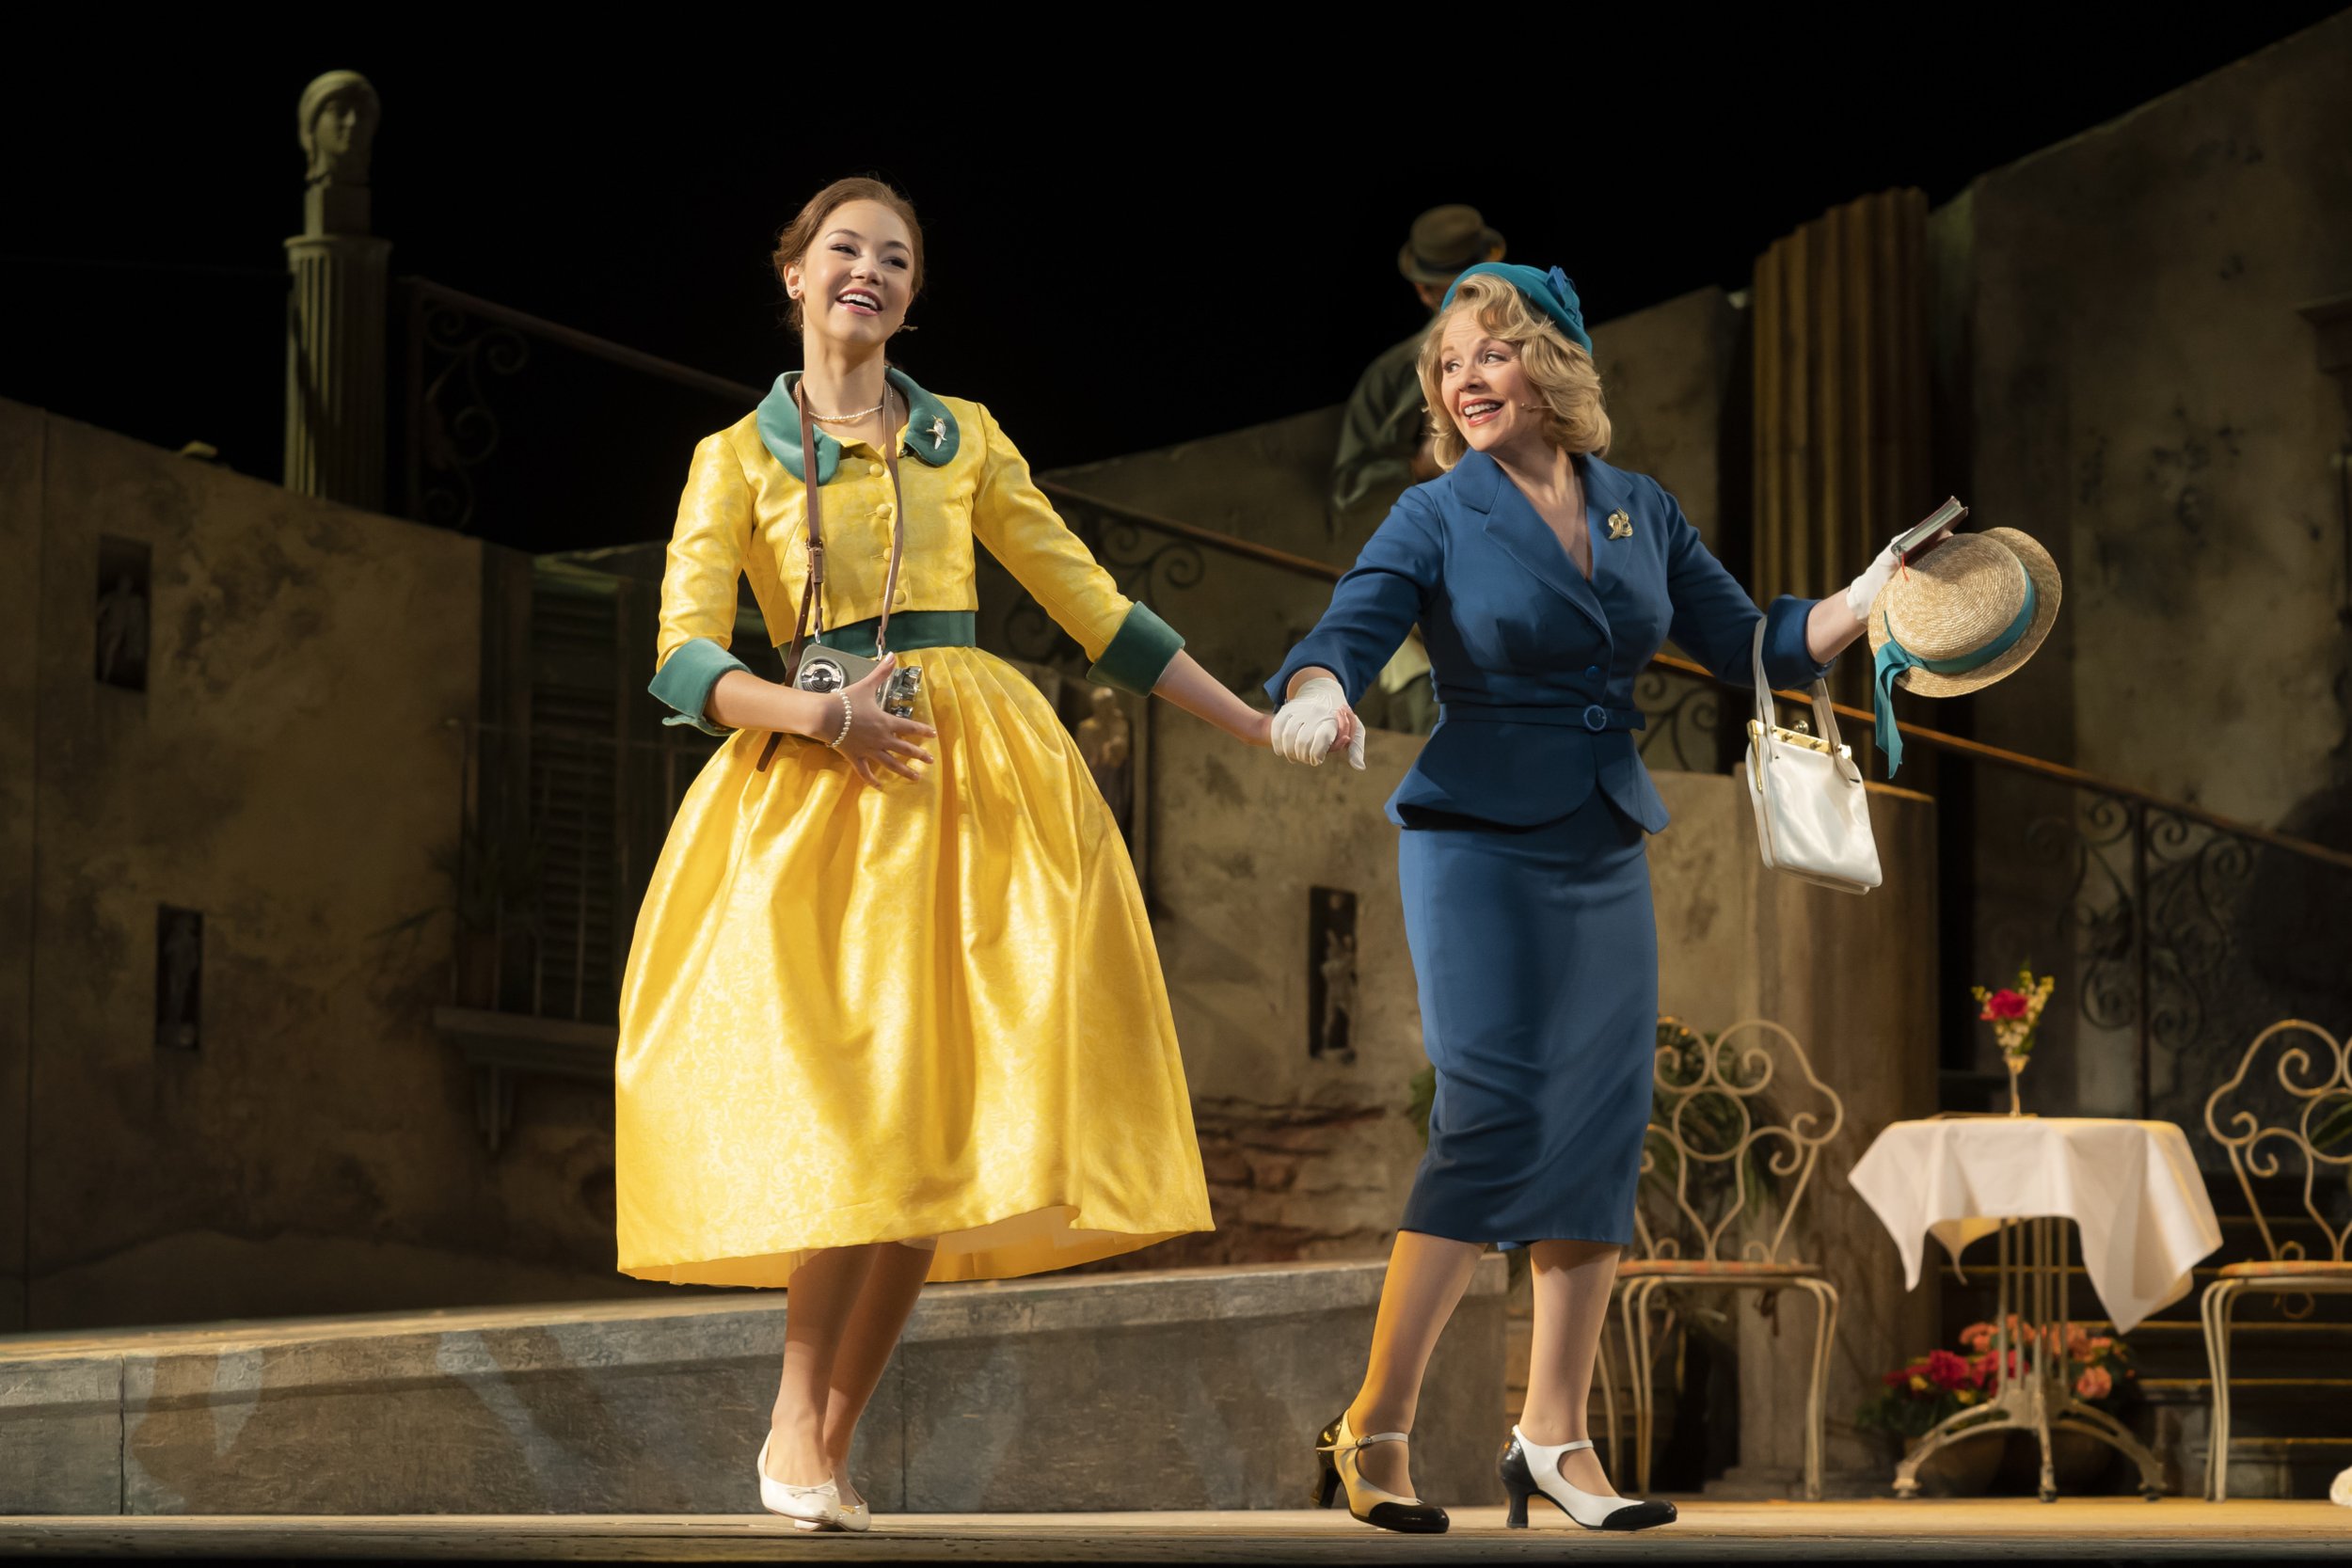 1_Solea-Pfeiffer-and-Renée-Fleming-in-the-Scenario-Two-production-of-The-Light-in-the-Piazza-at-Lyric-Opera-House_Credit-Liz-Lauren-scaled.jpeg